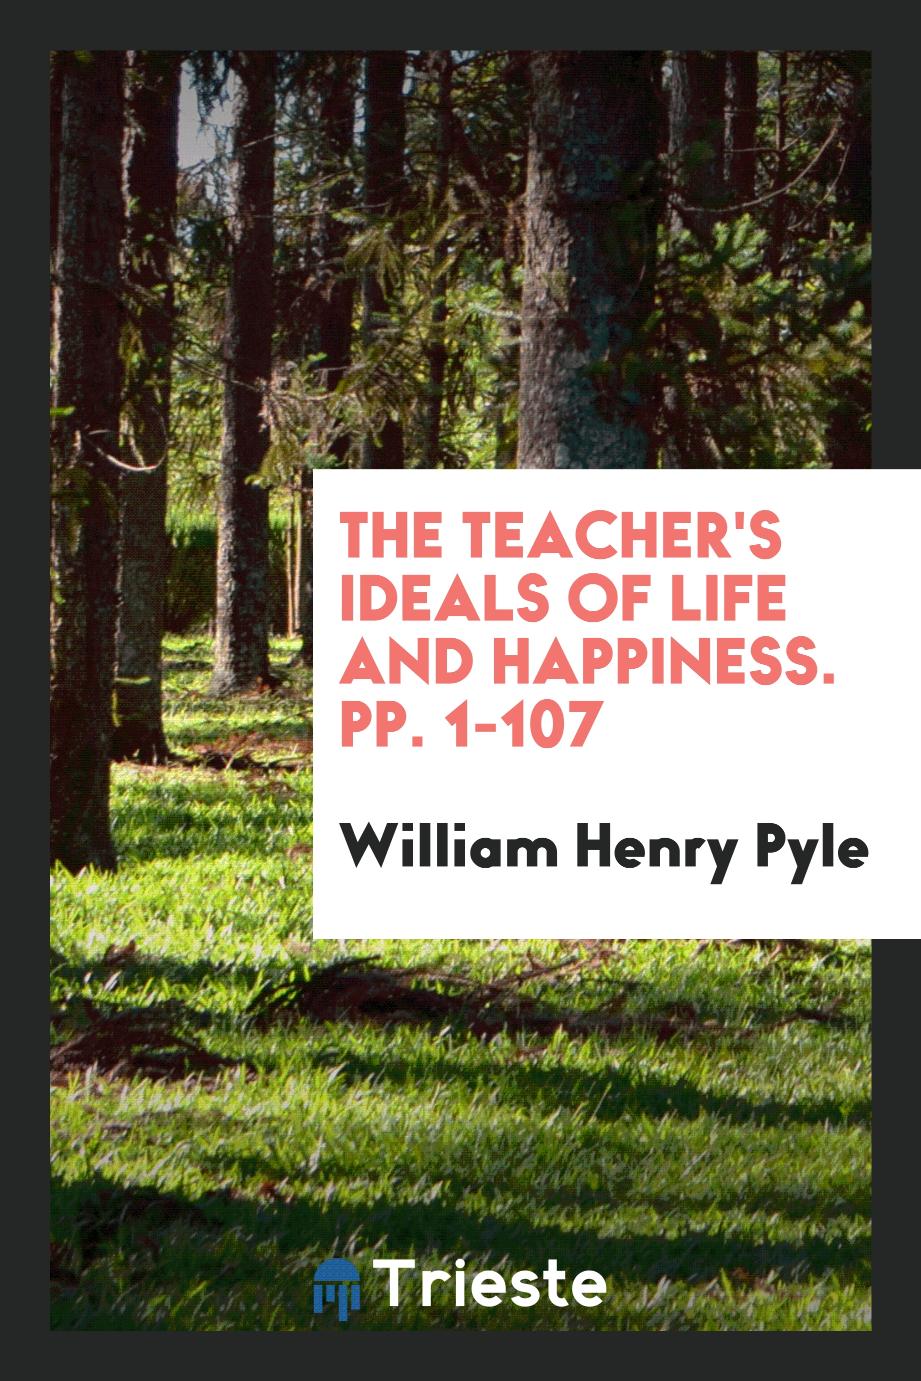 The Teacher's Ideals of Life and Happiness. pp. 1-107